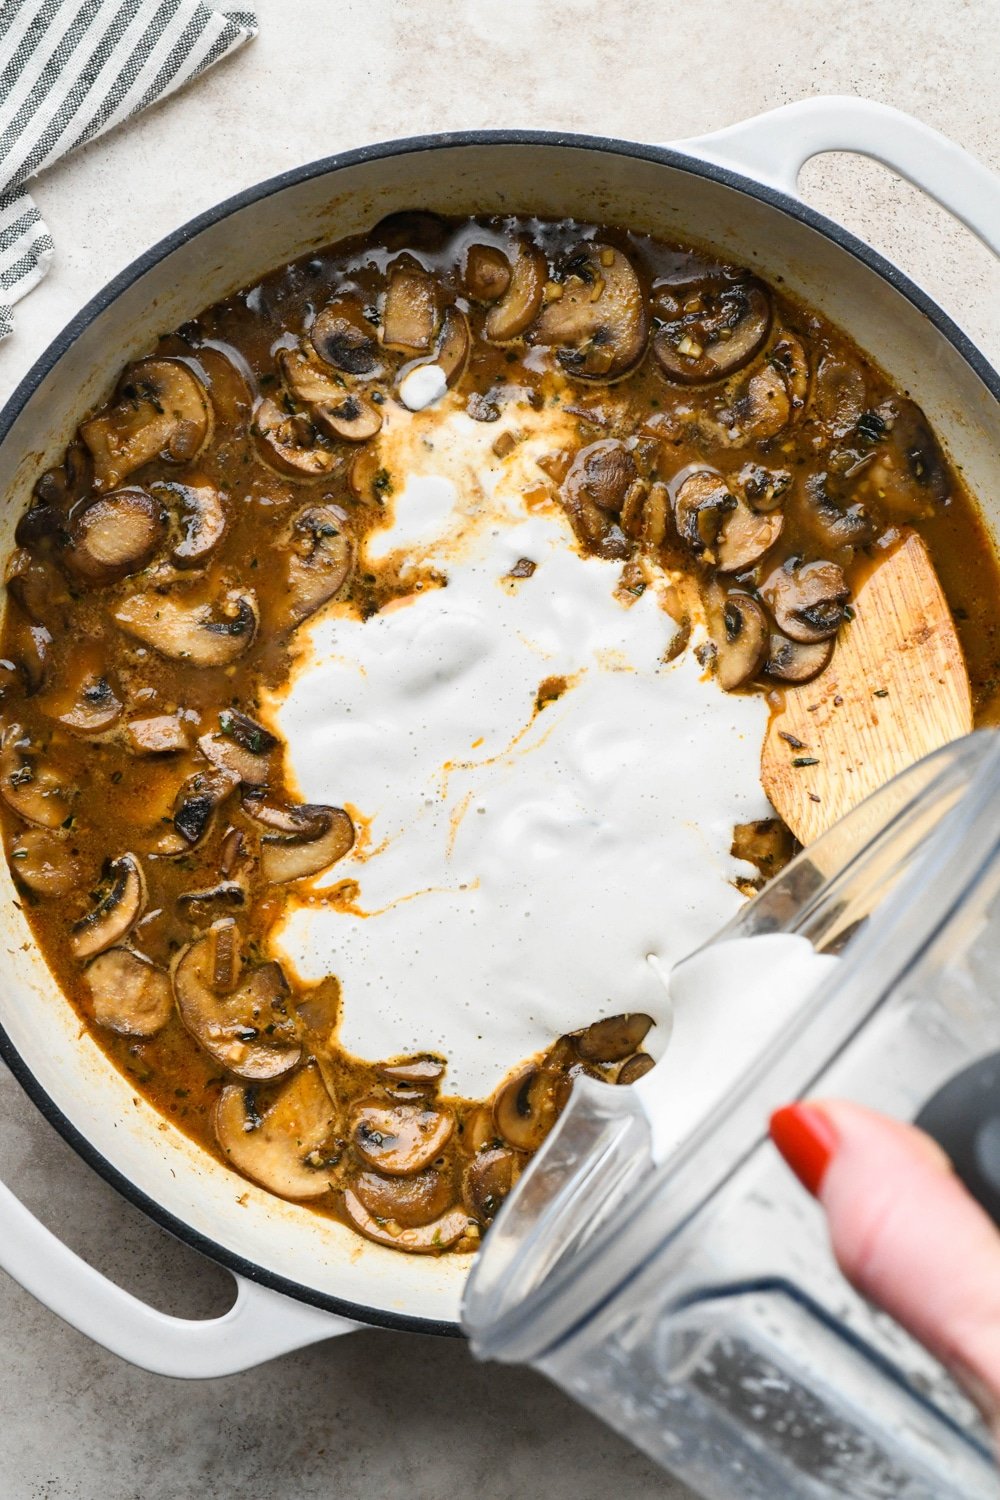 How to make Gluten Free Mushroom Gravy: Pouring cashew cream into skillet with mushrooms and broth.